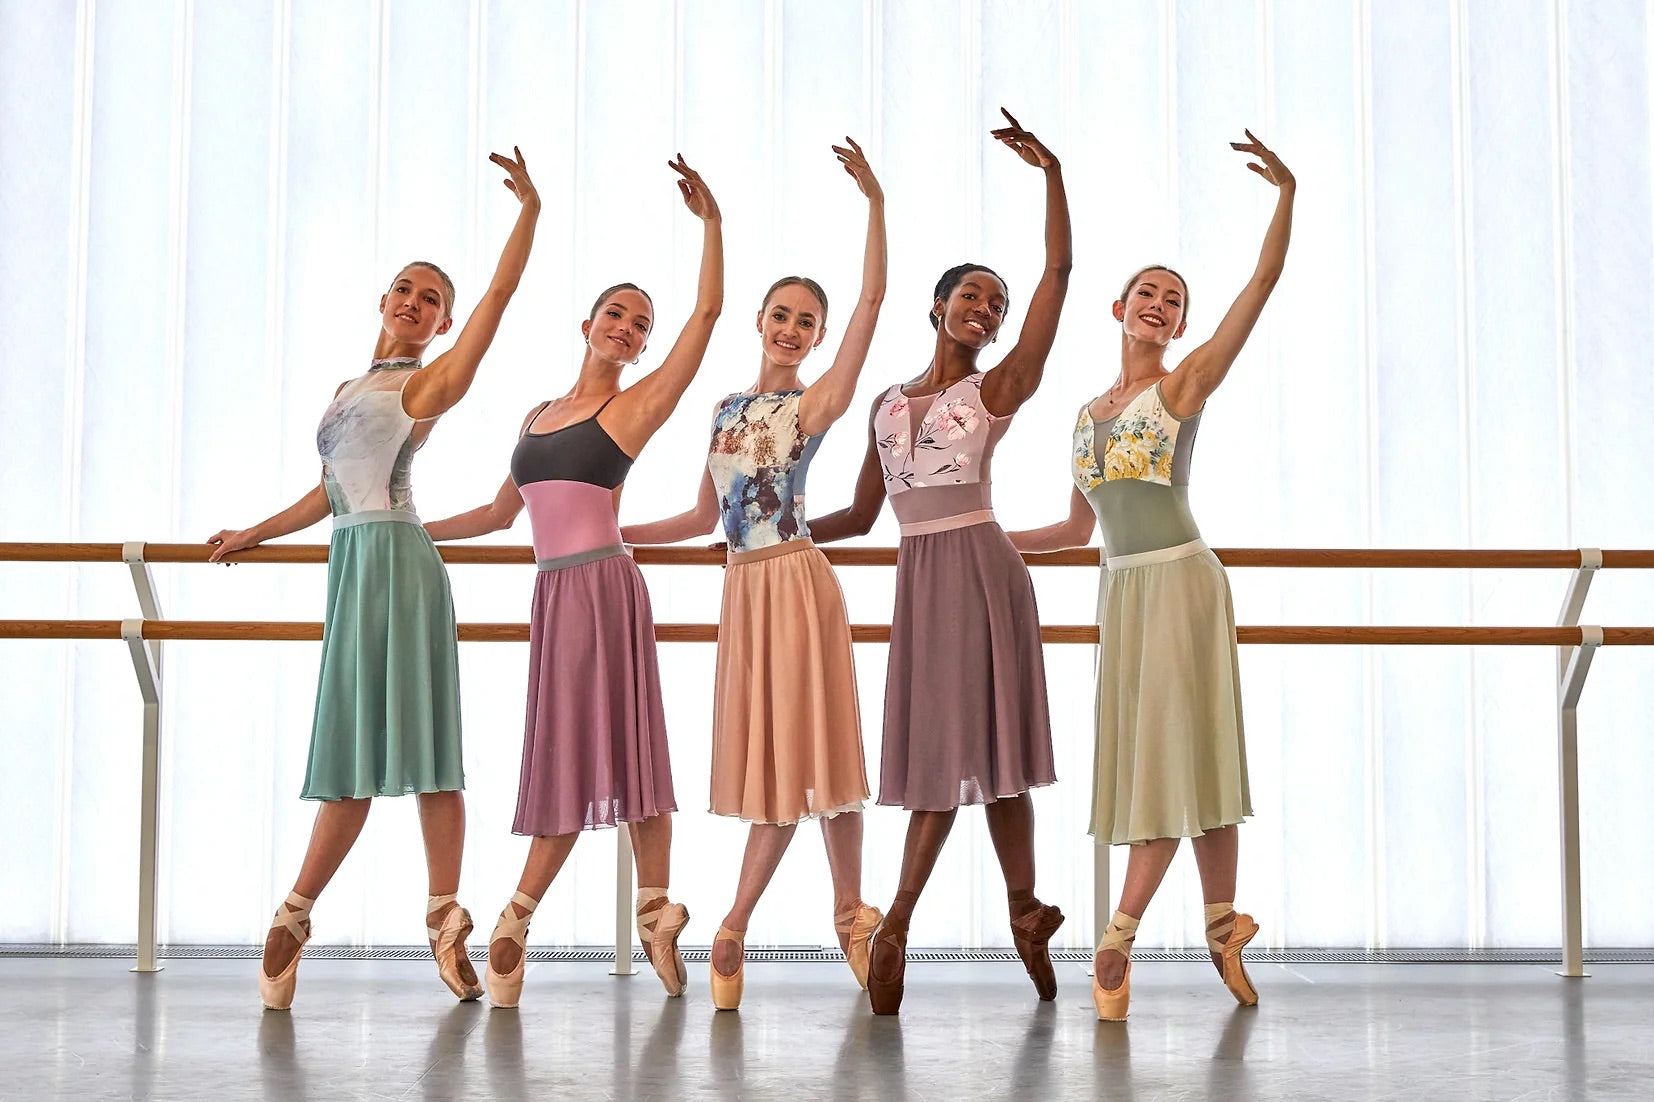 Dancers from English National Ballet in The Collective Dancewear leotards and Ballet skirts by Lucinda skirts. Photo by Szabina Biro. Dancers Emily Suzuki, Chloe Keneally, Ivana Bueno, Precious Adams and Lucinda  Strachan